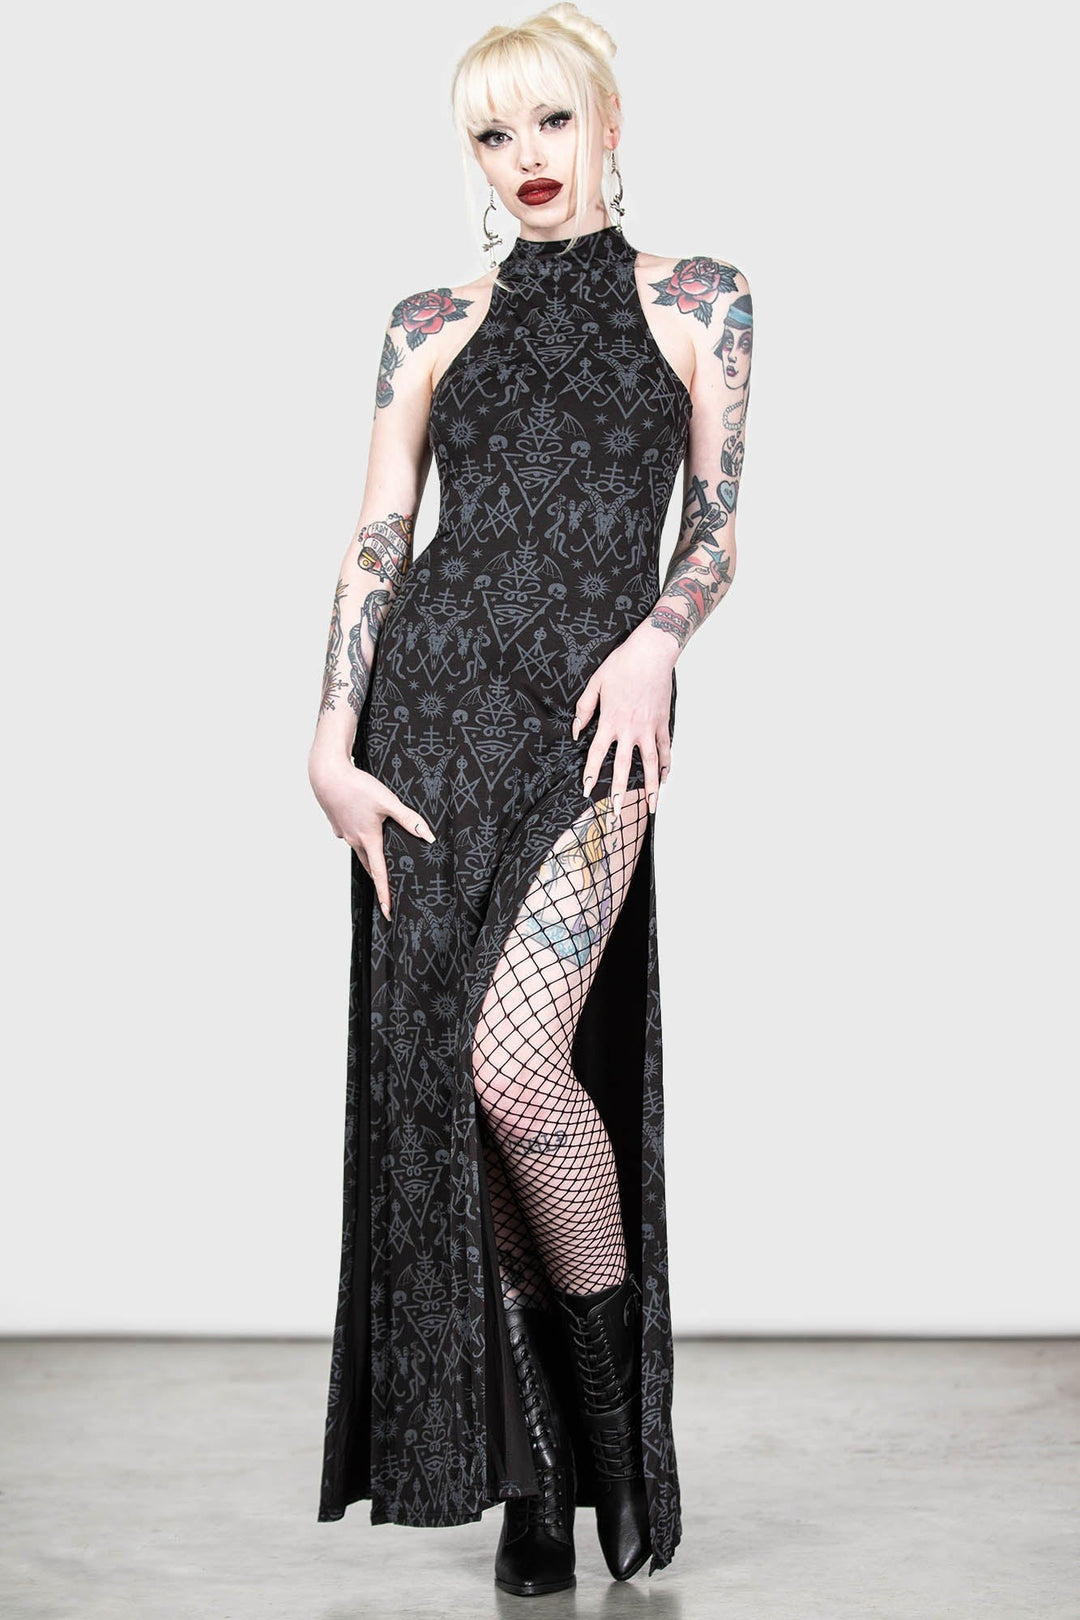 spooky occult witchy dress